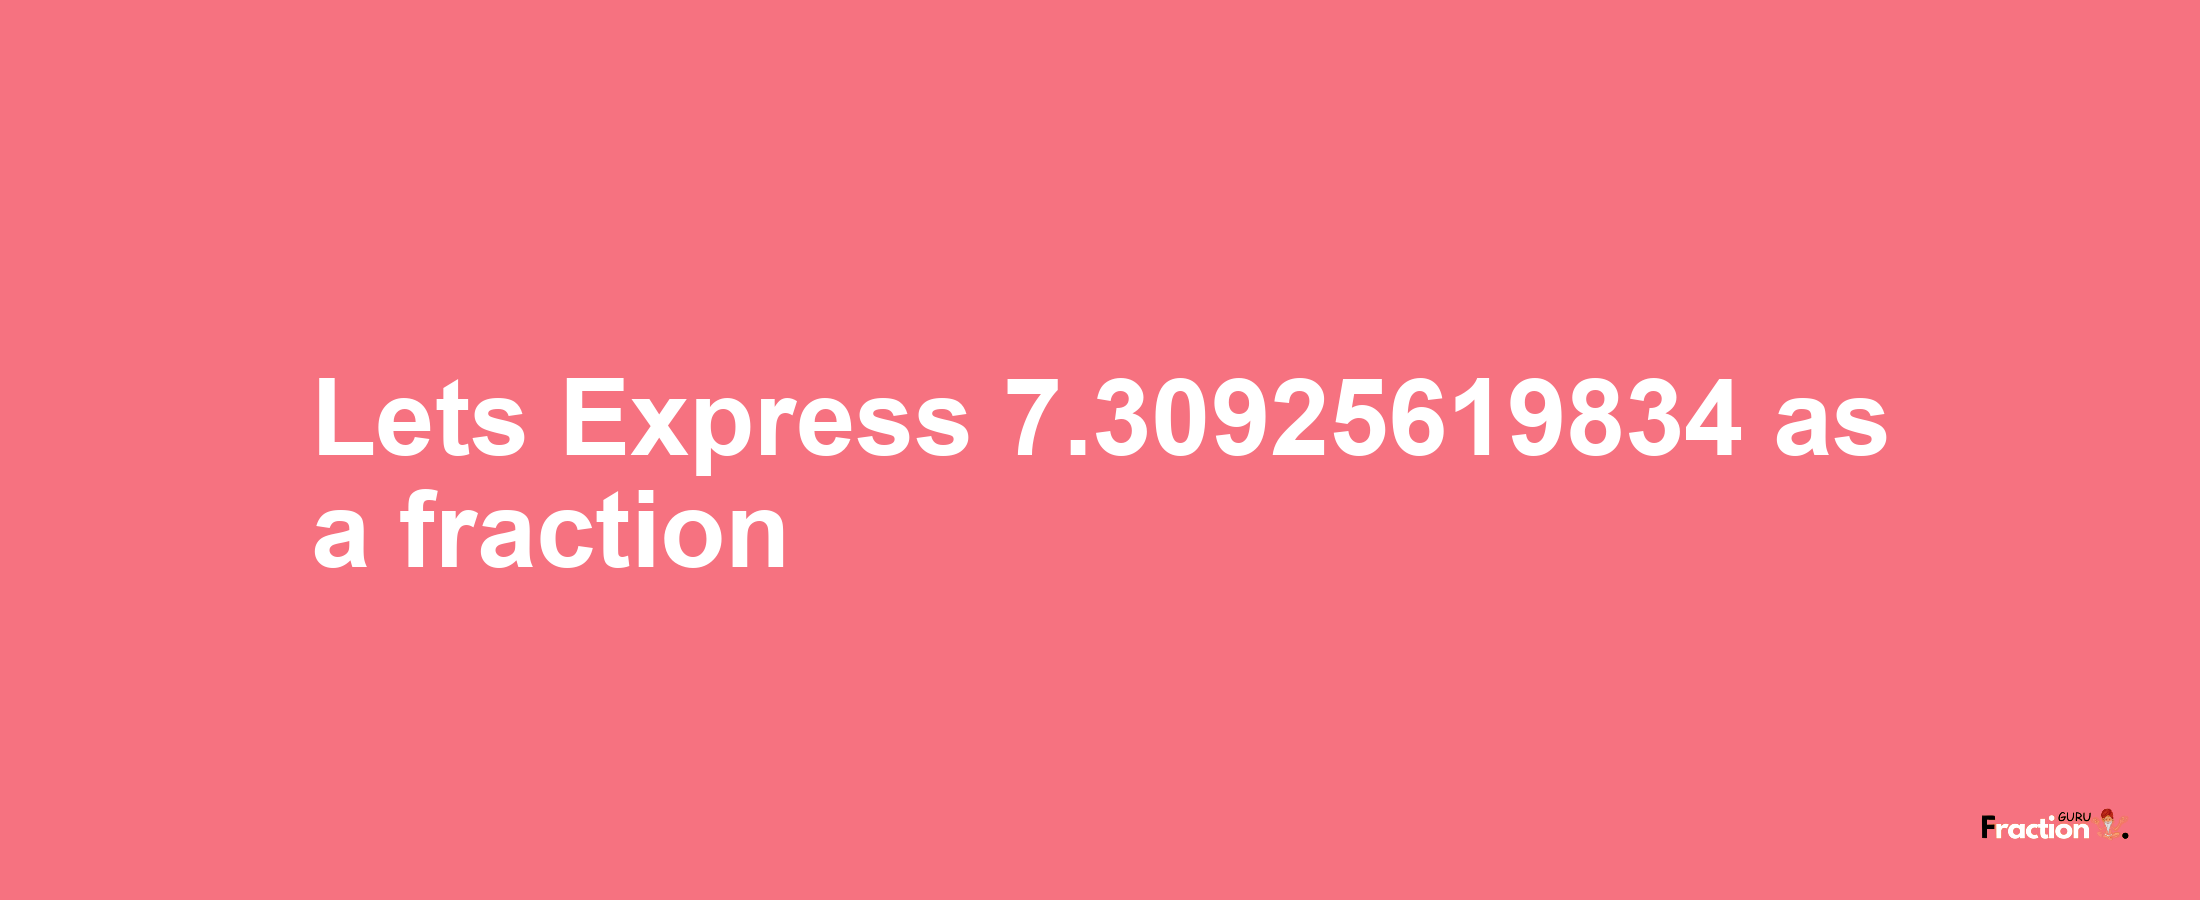 Lets Express 7.30925619834 as afraction